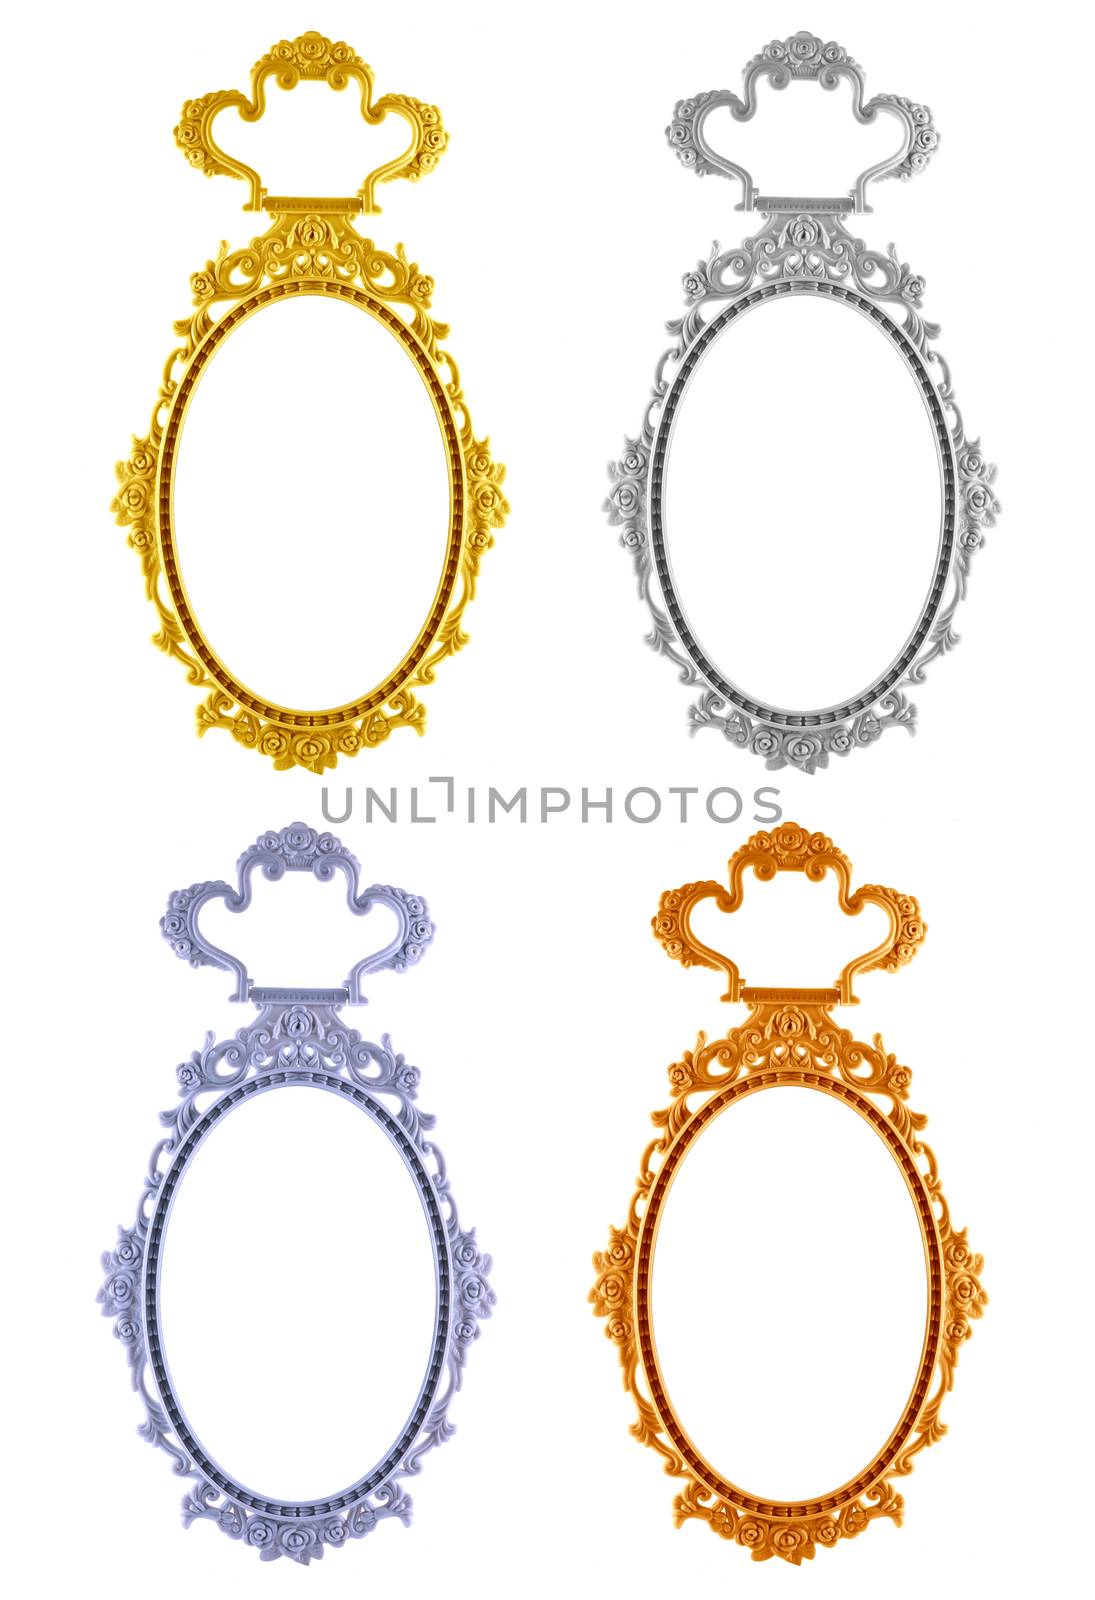 Frame oval mirror 4 color circle isolated on white background. by jayzynism